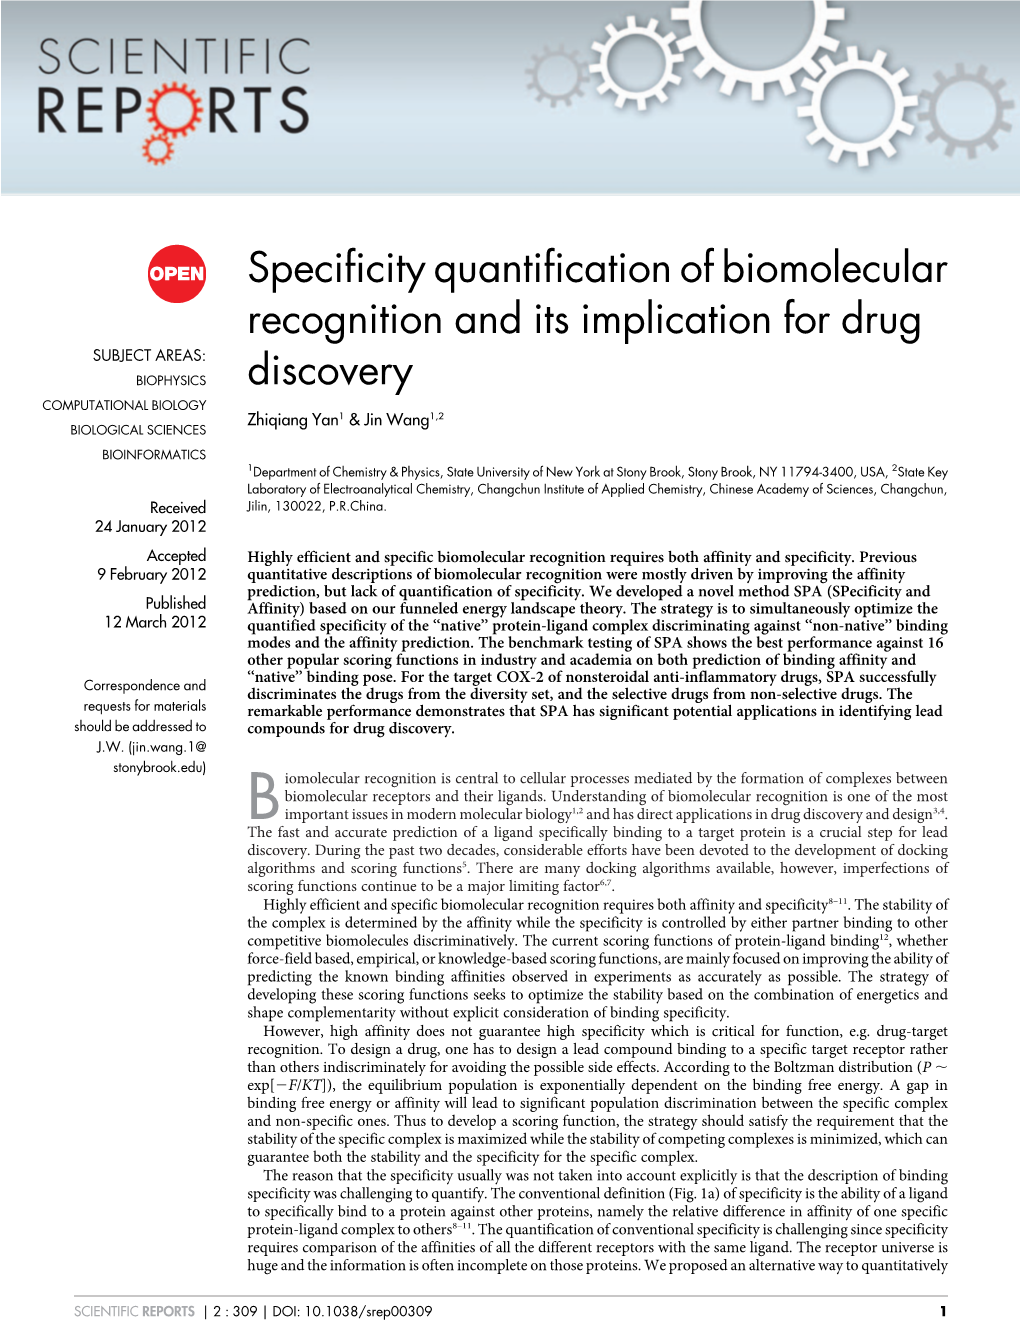 Specificity Quantification of Biomolecular Recognition and Its